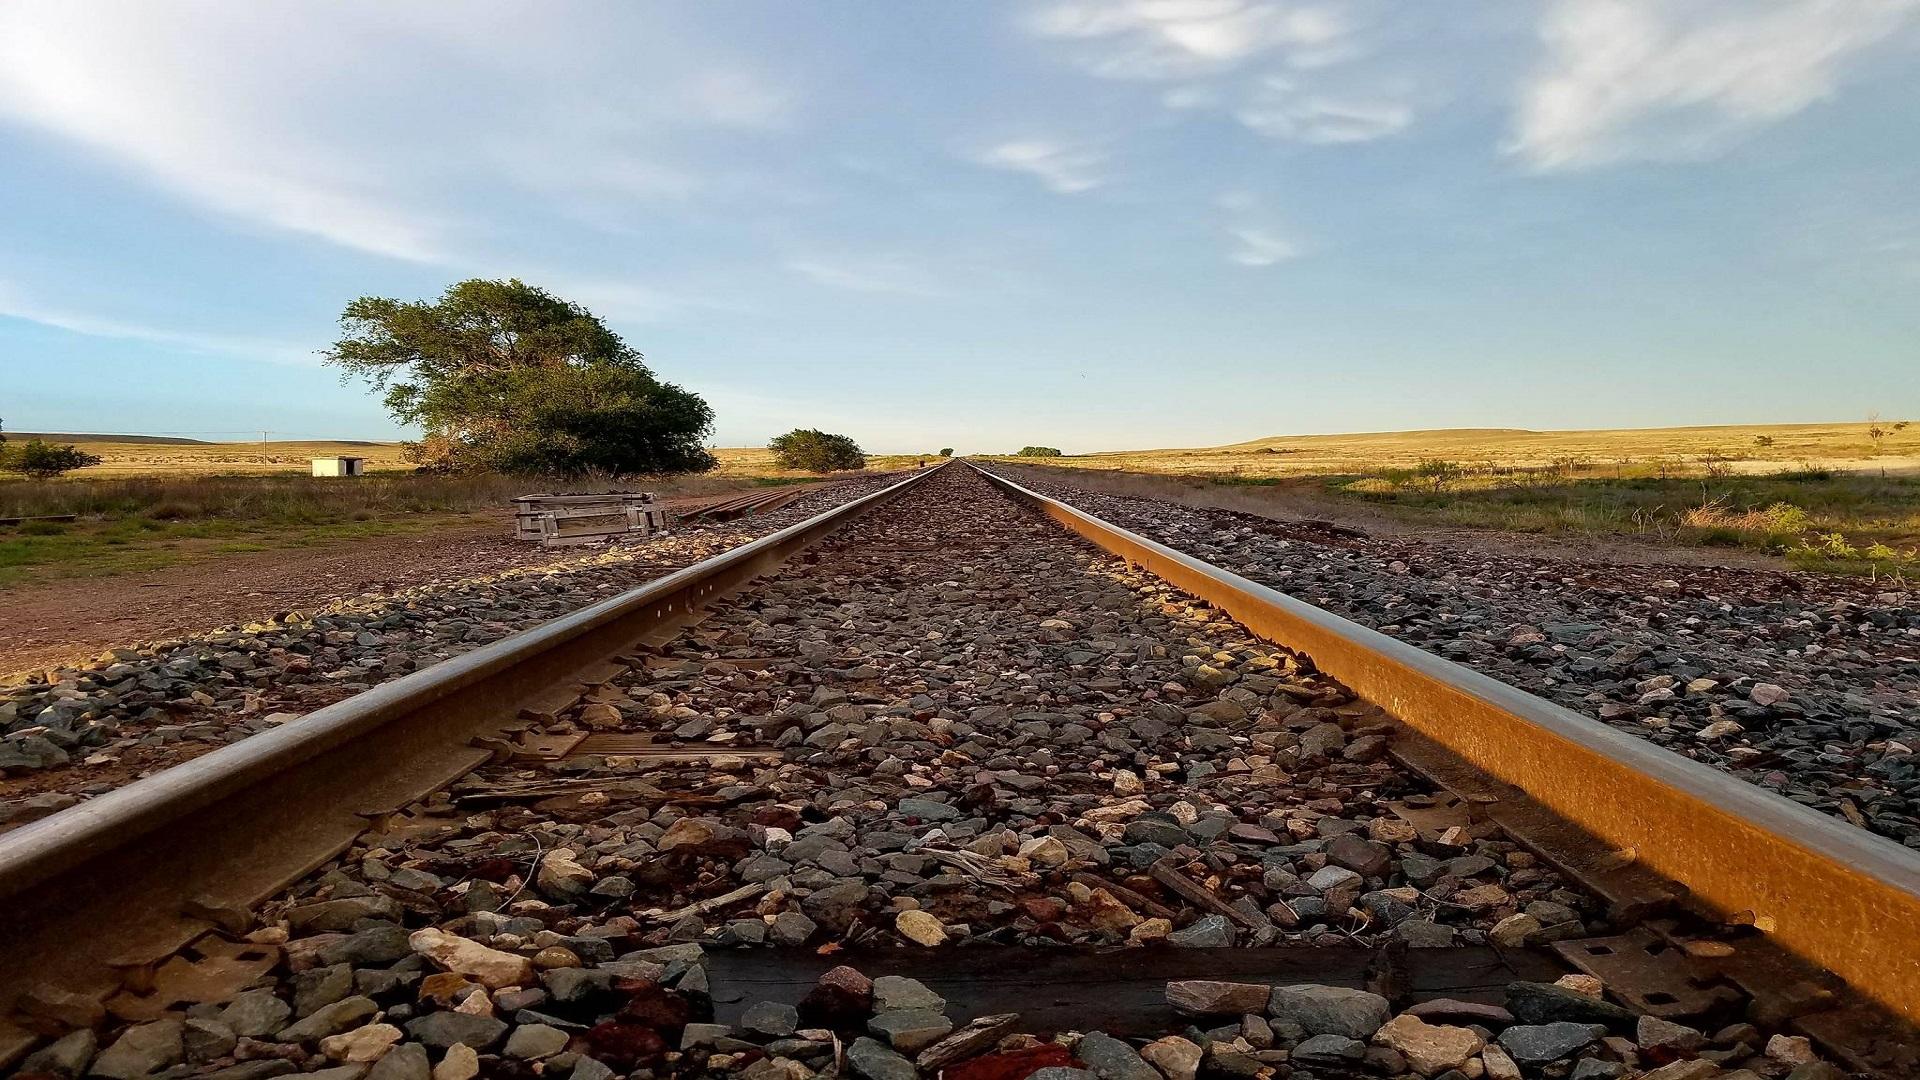 OC) A Railroad at sunset in New Mexico [1920x1080]